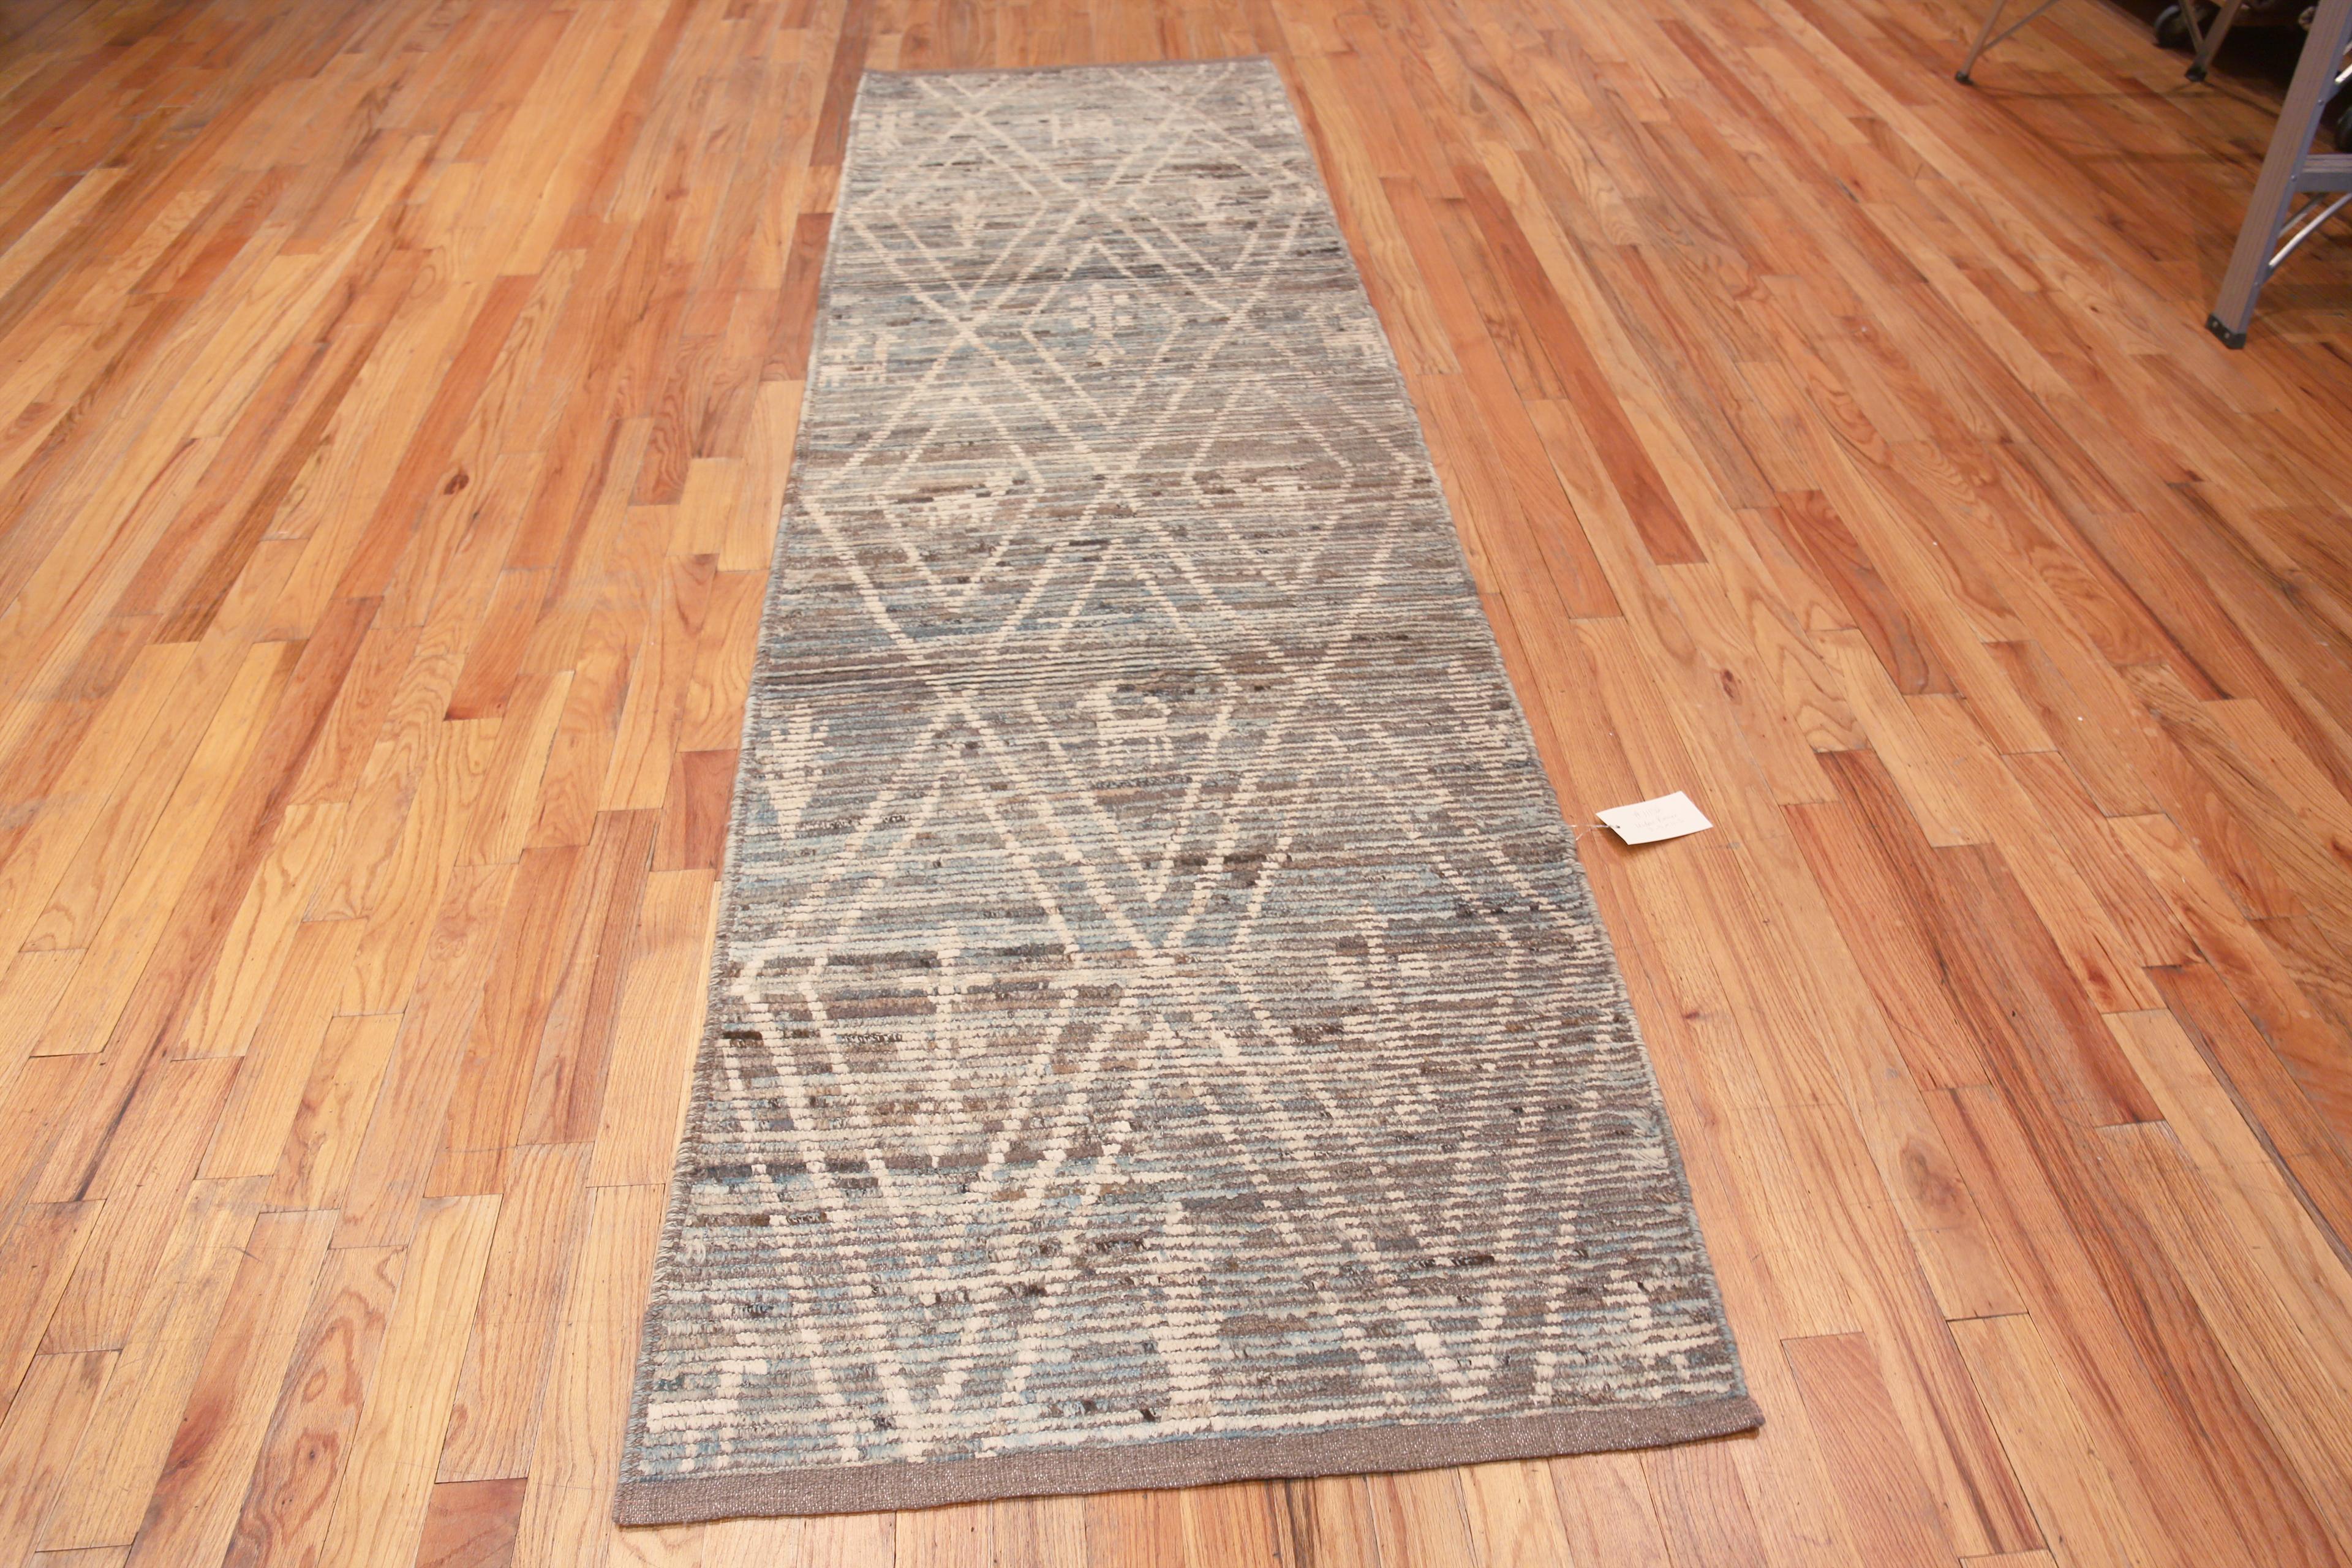 A Magnificent Grey Neutral Color Background and Tribal Geometric Primitive Animal Pattern Modern Hallway Runner Rug, Country of Origin: Central Asia, Circa Date: Modern Rug 